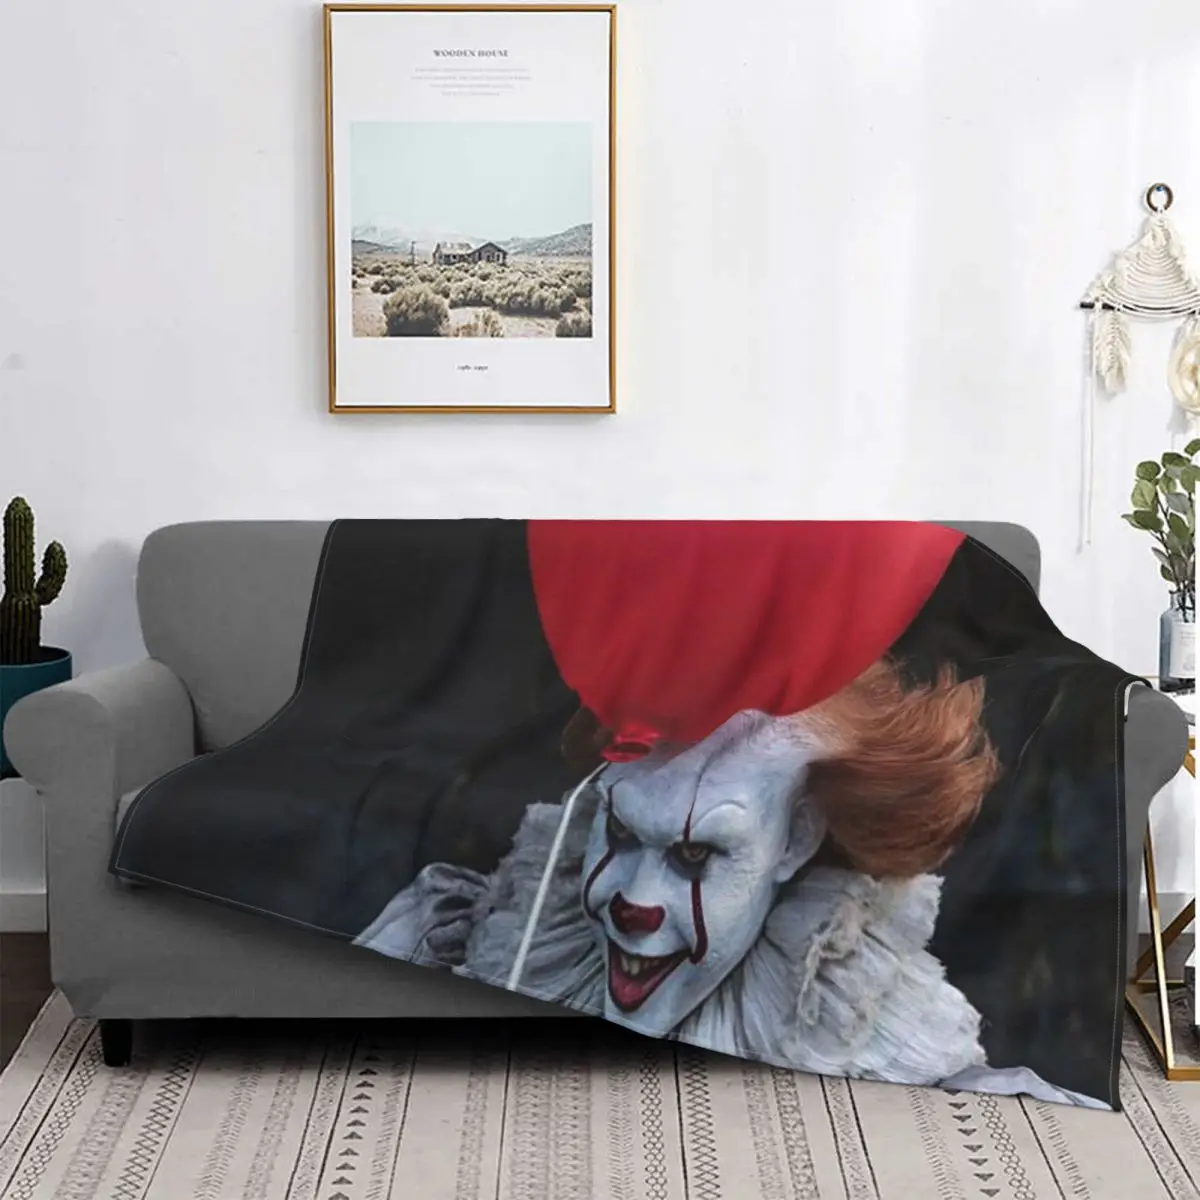 

Stephen King's It Blankets Coral Fleece Plush Print Clown Multi-function Soft Throw Blanket for Bedding Office Bedding Throws